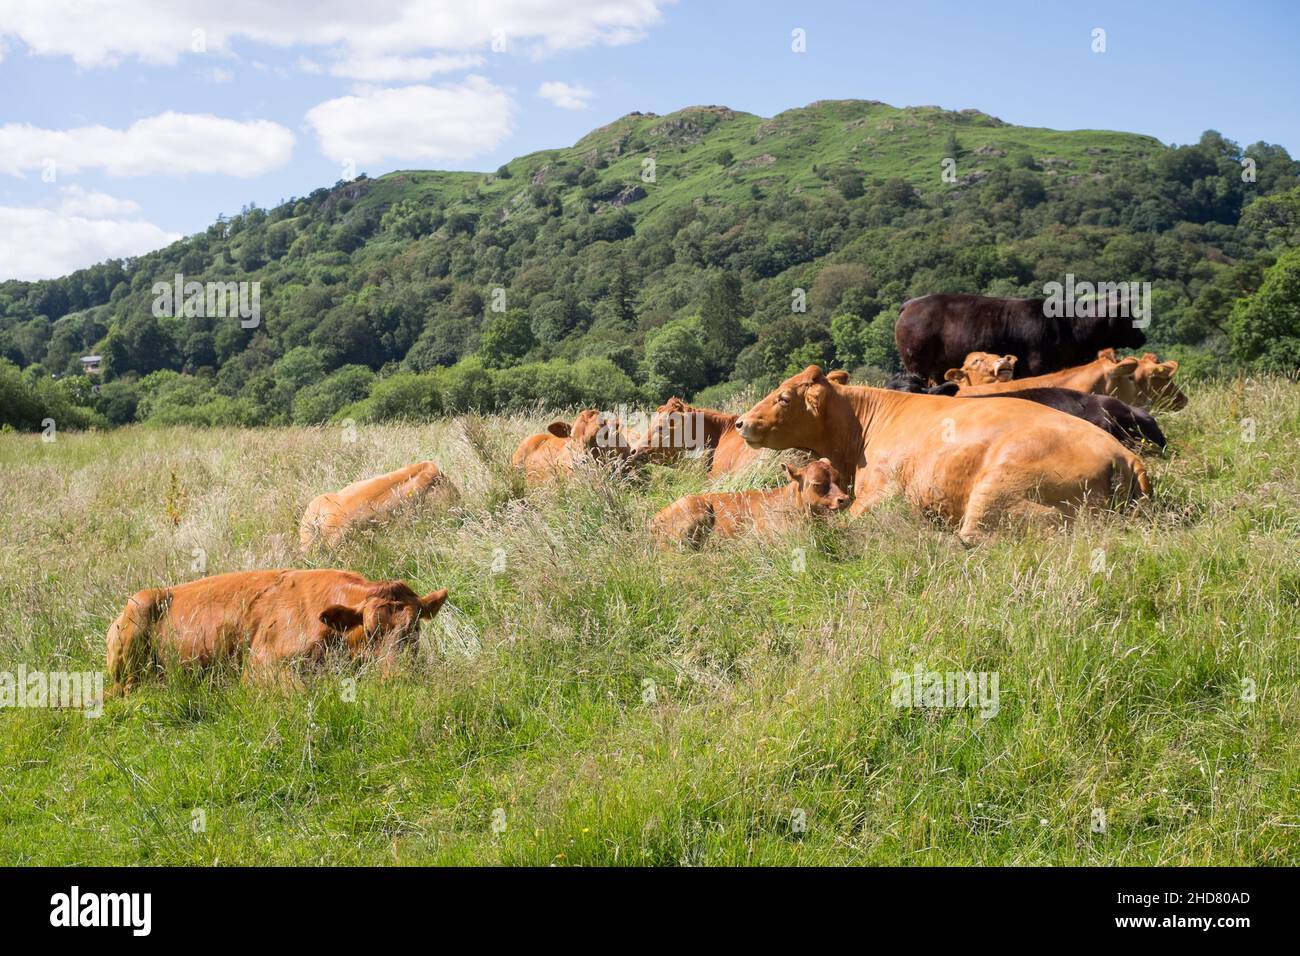 A herd of cows cattle relaxing lying in grass on sunny day with Lake District fells in the background Stock Photo